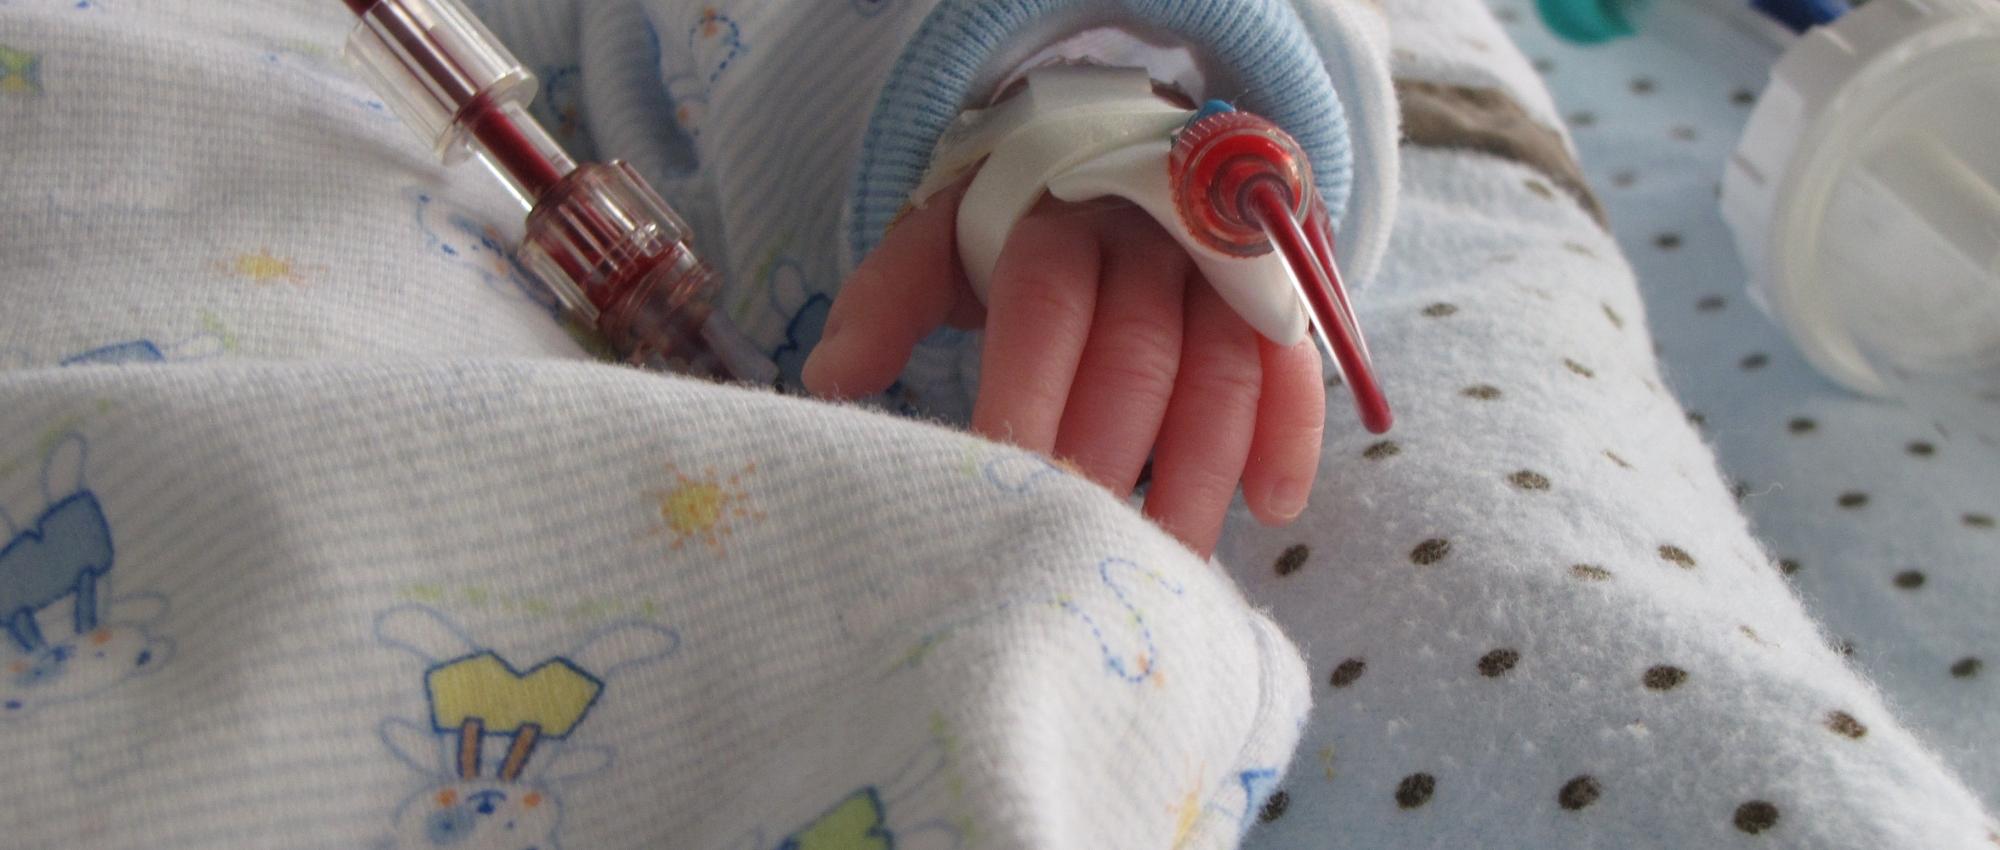 Image of a baby in the hospital bed performing a blood transfusion